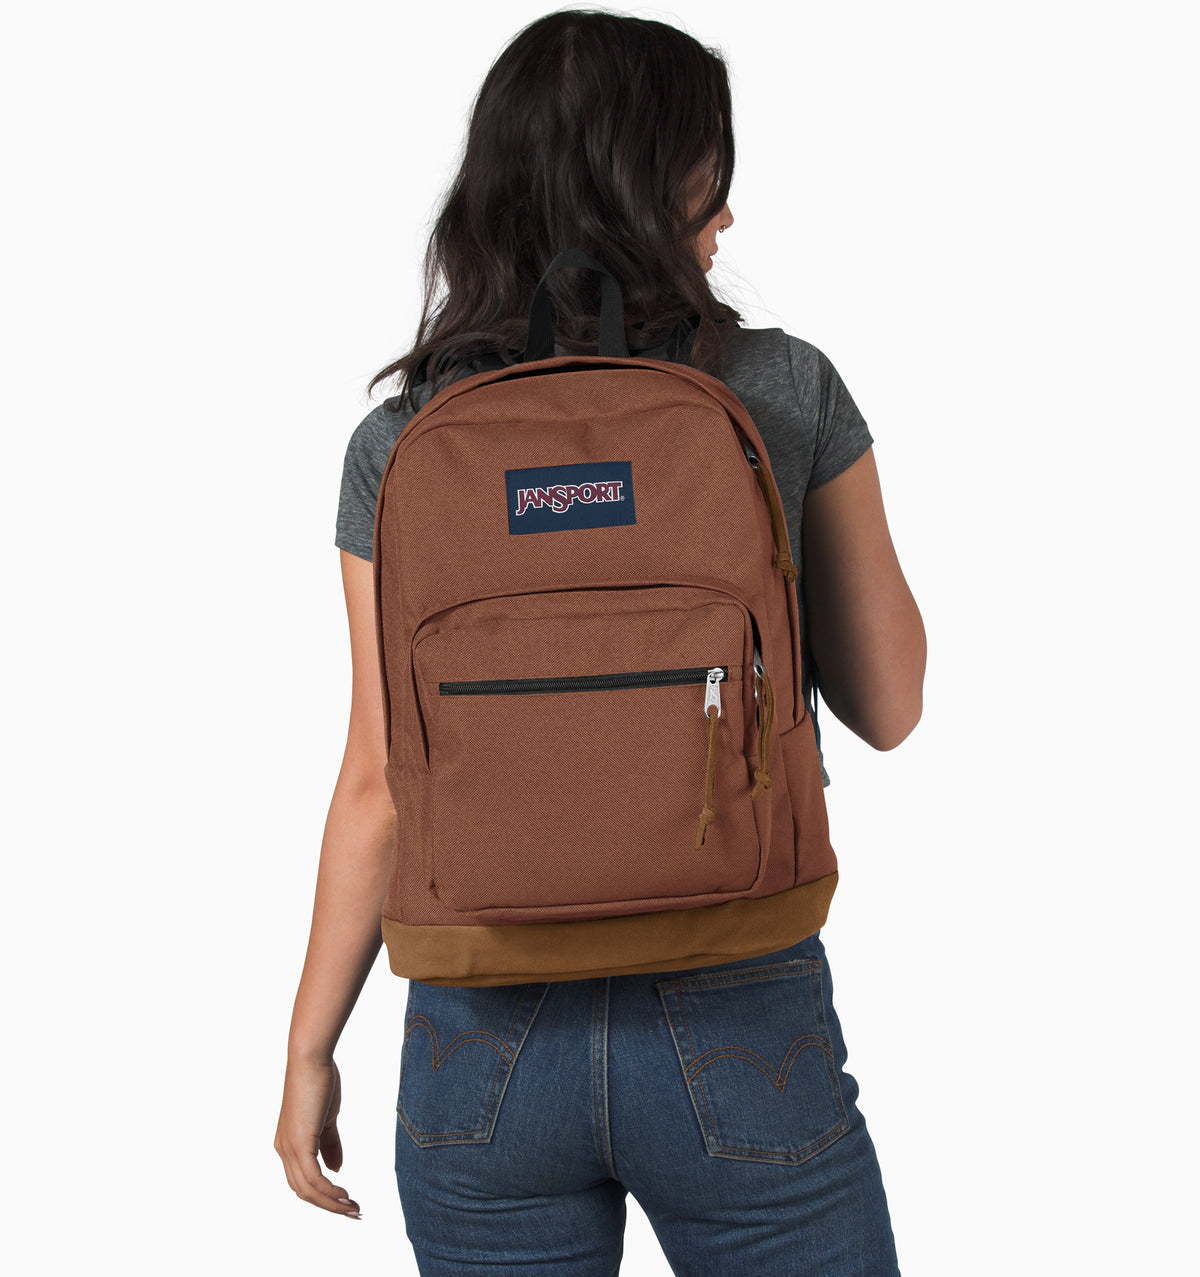 JanSport 16" Right Pack Laptop Backpack 31L - Brown Patina